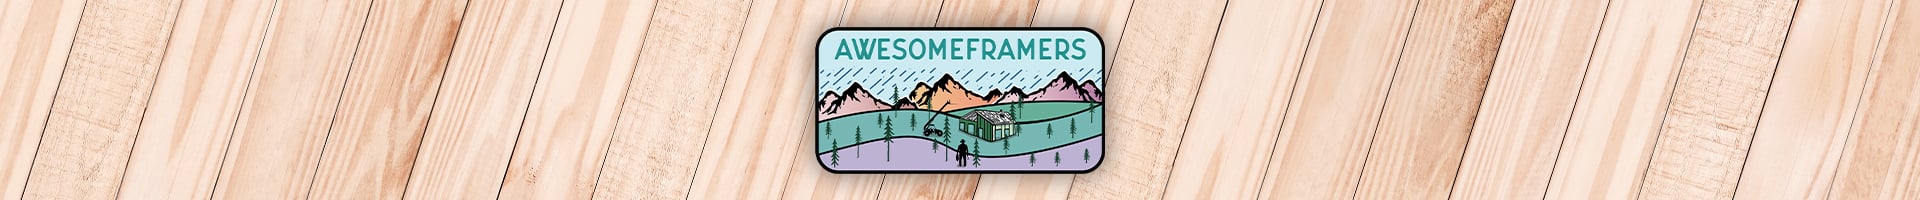 Awesome Framers